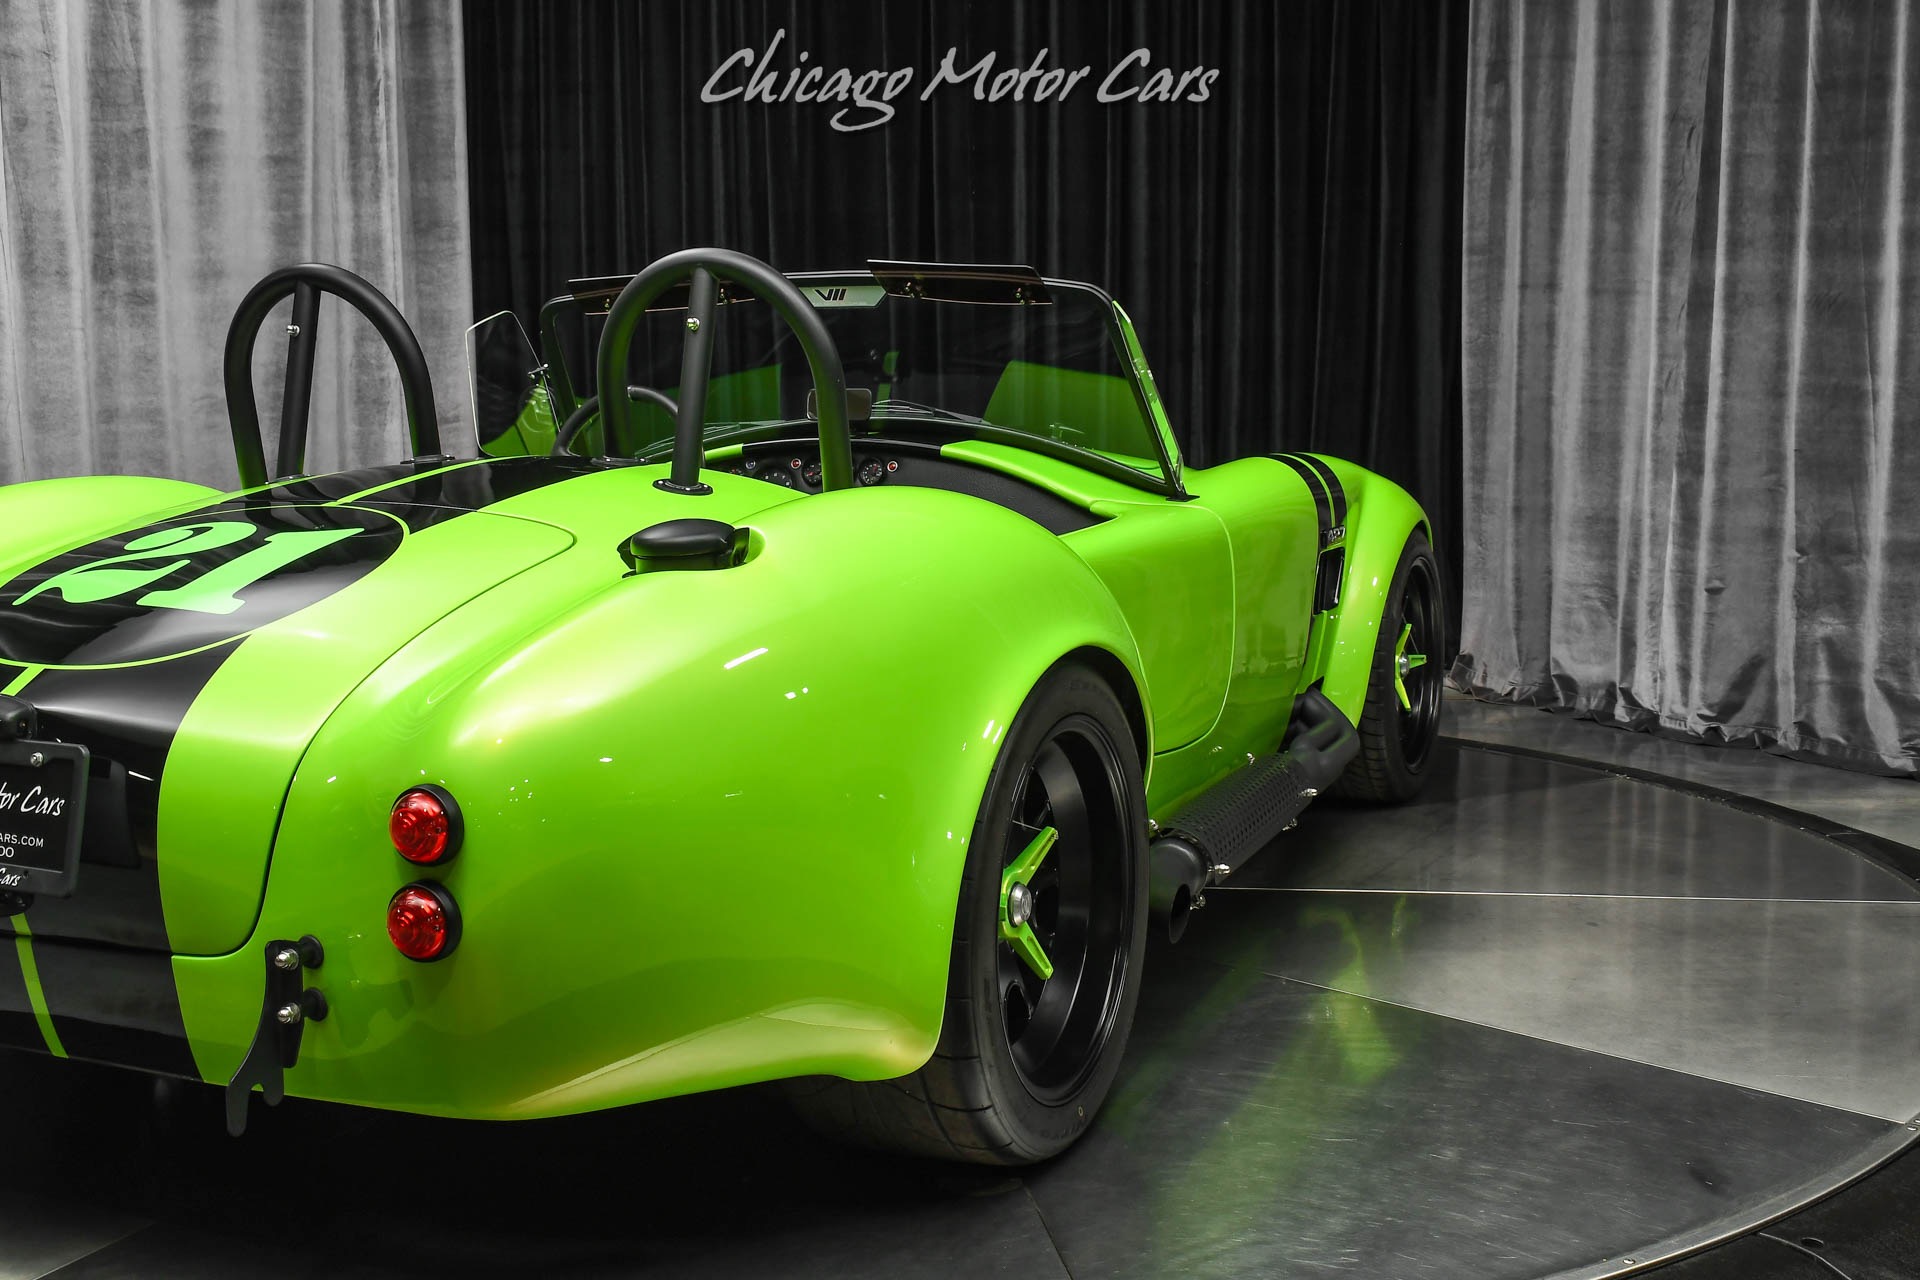 Used-1965-Backdraft-Racing-Cobra-Roadster-427-540-WHP-Tremec-5-Speed-Full-PPF-Amazing-Build